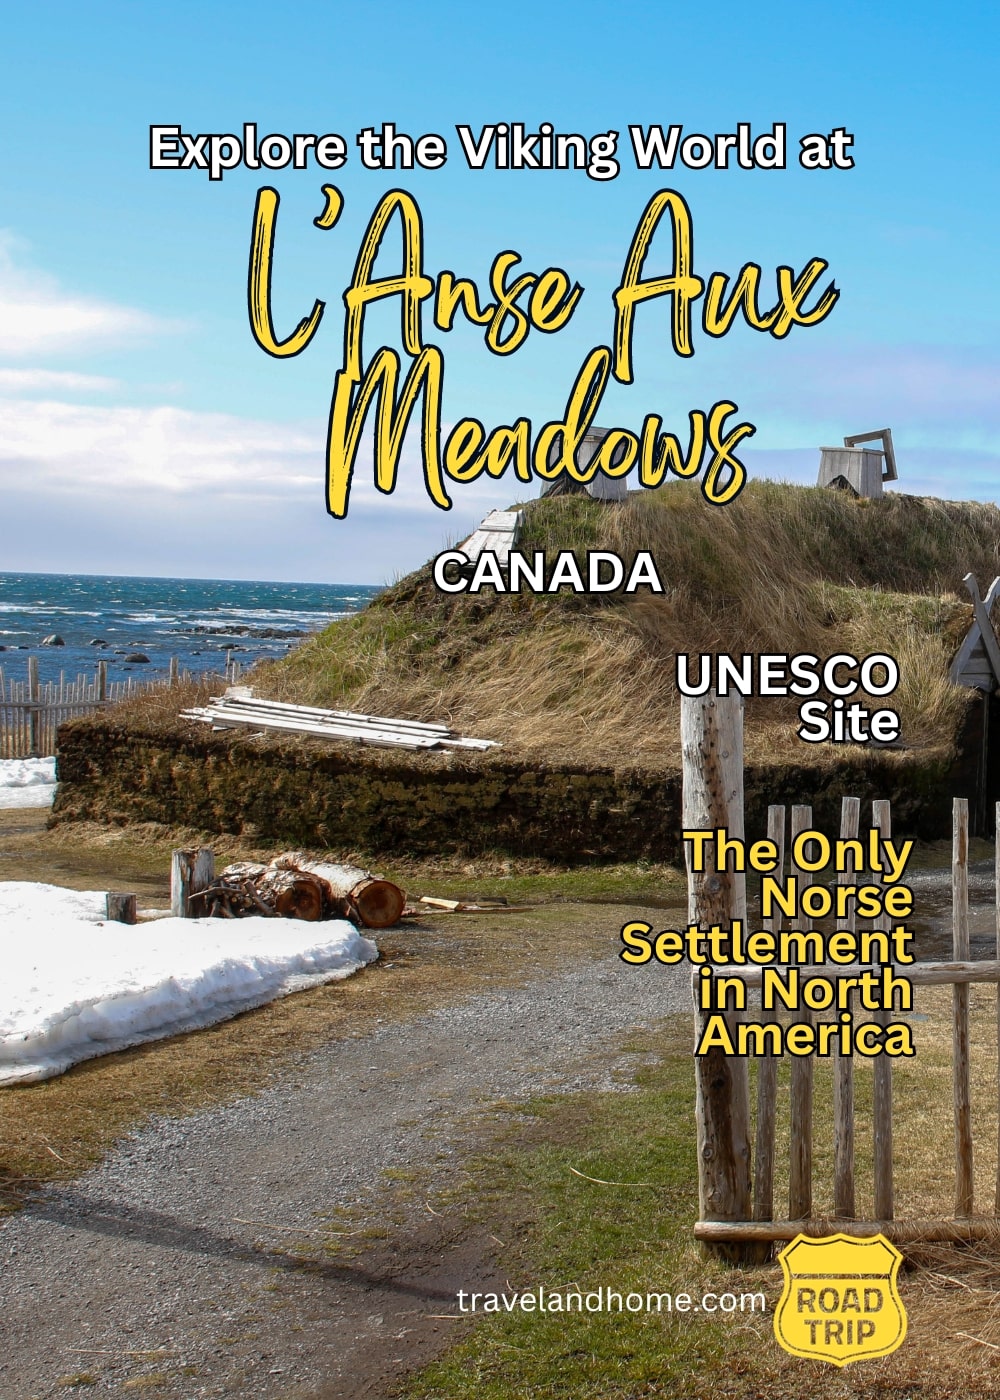 Drive Across Newfoundland from St. John’s to L'Anse aux Meadows, road trip, where to stay, accommodation min